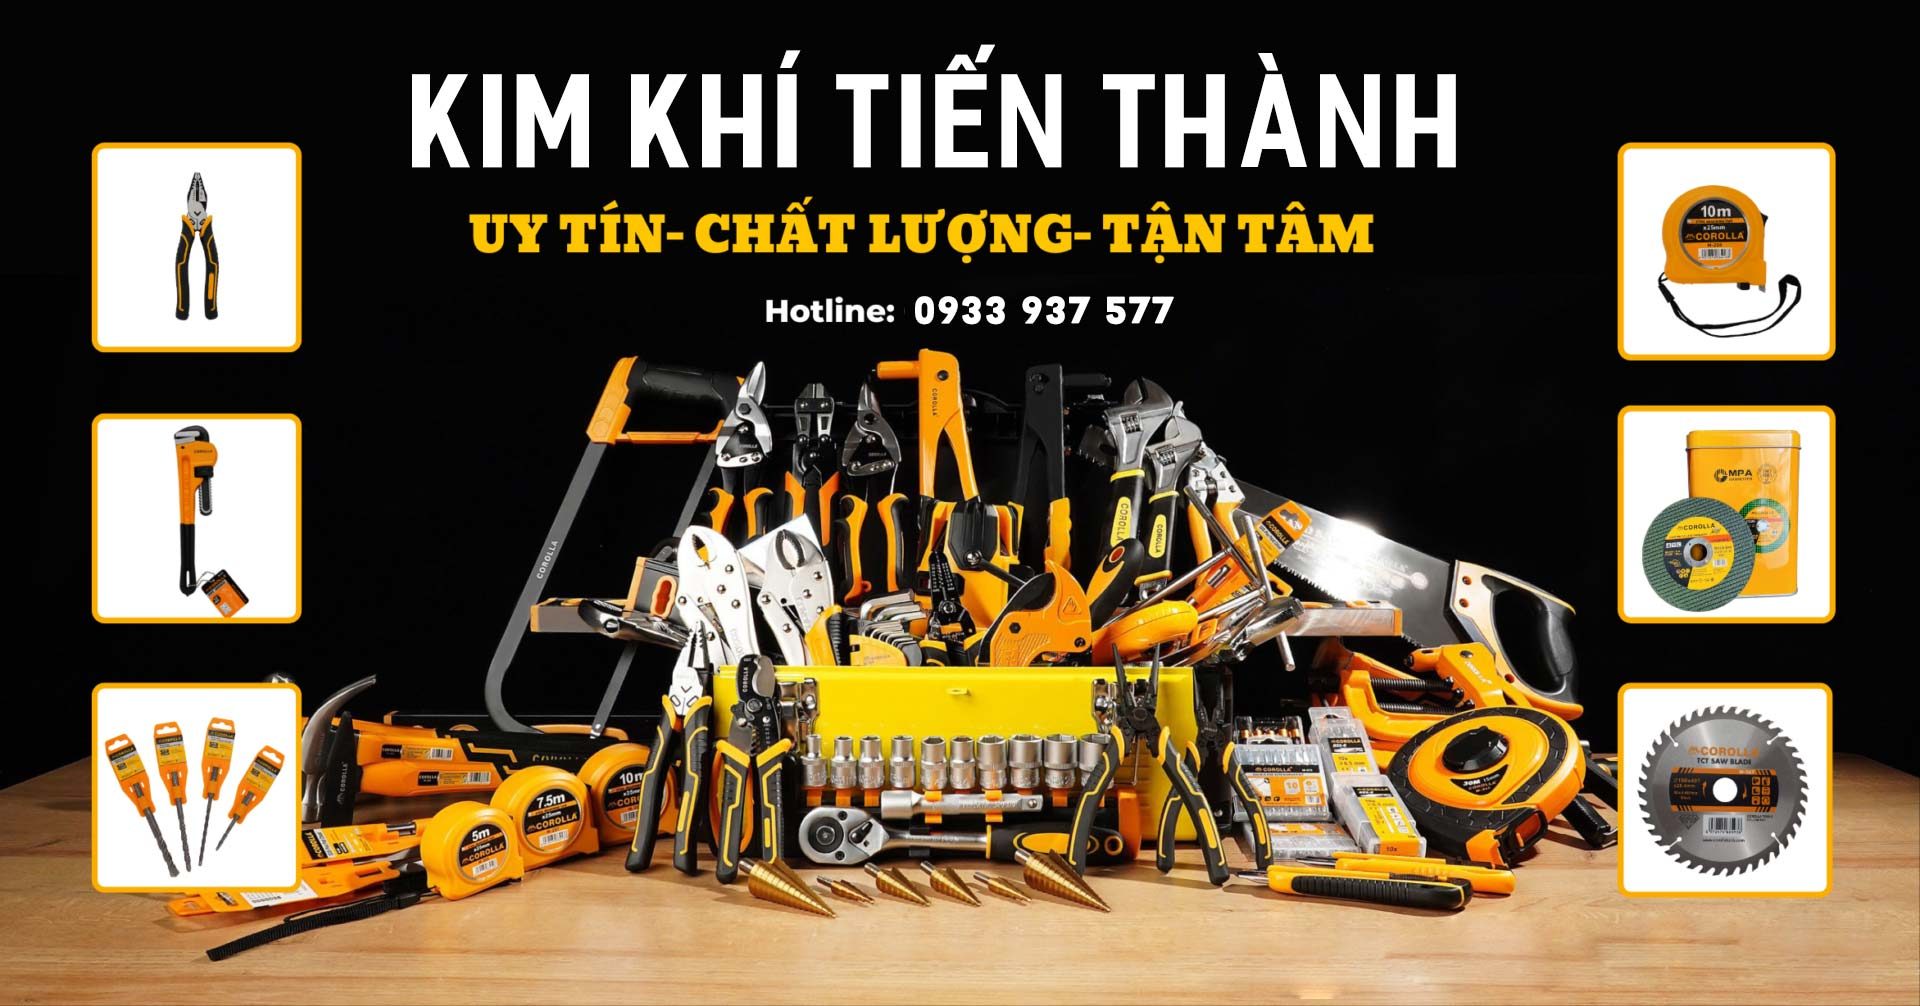 ban ty ren chat luong 02